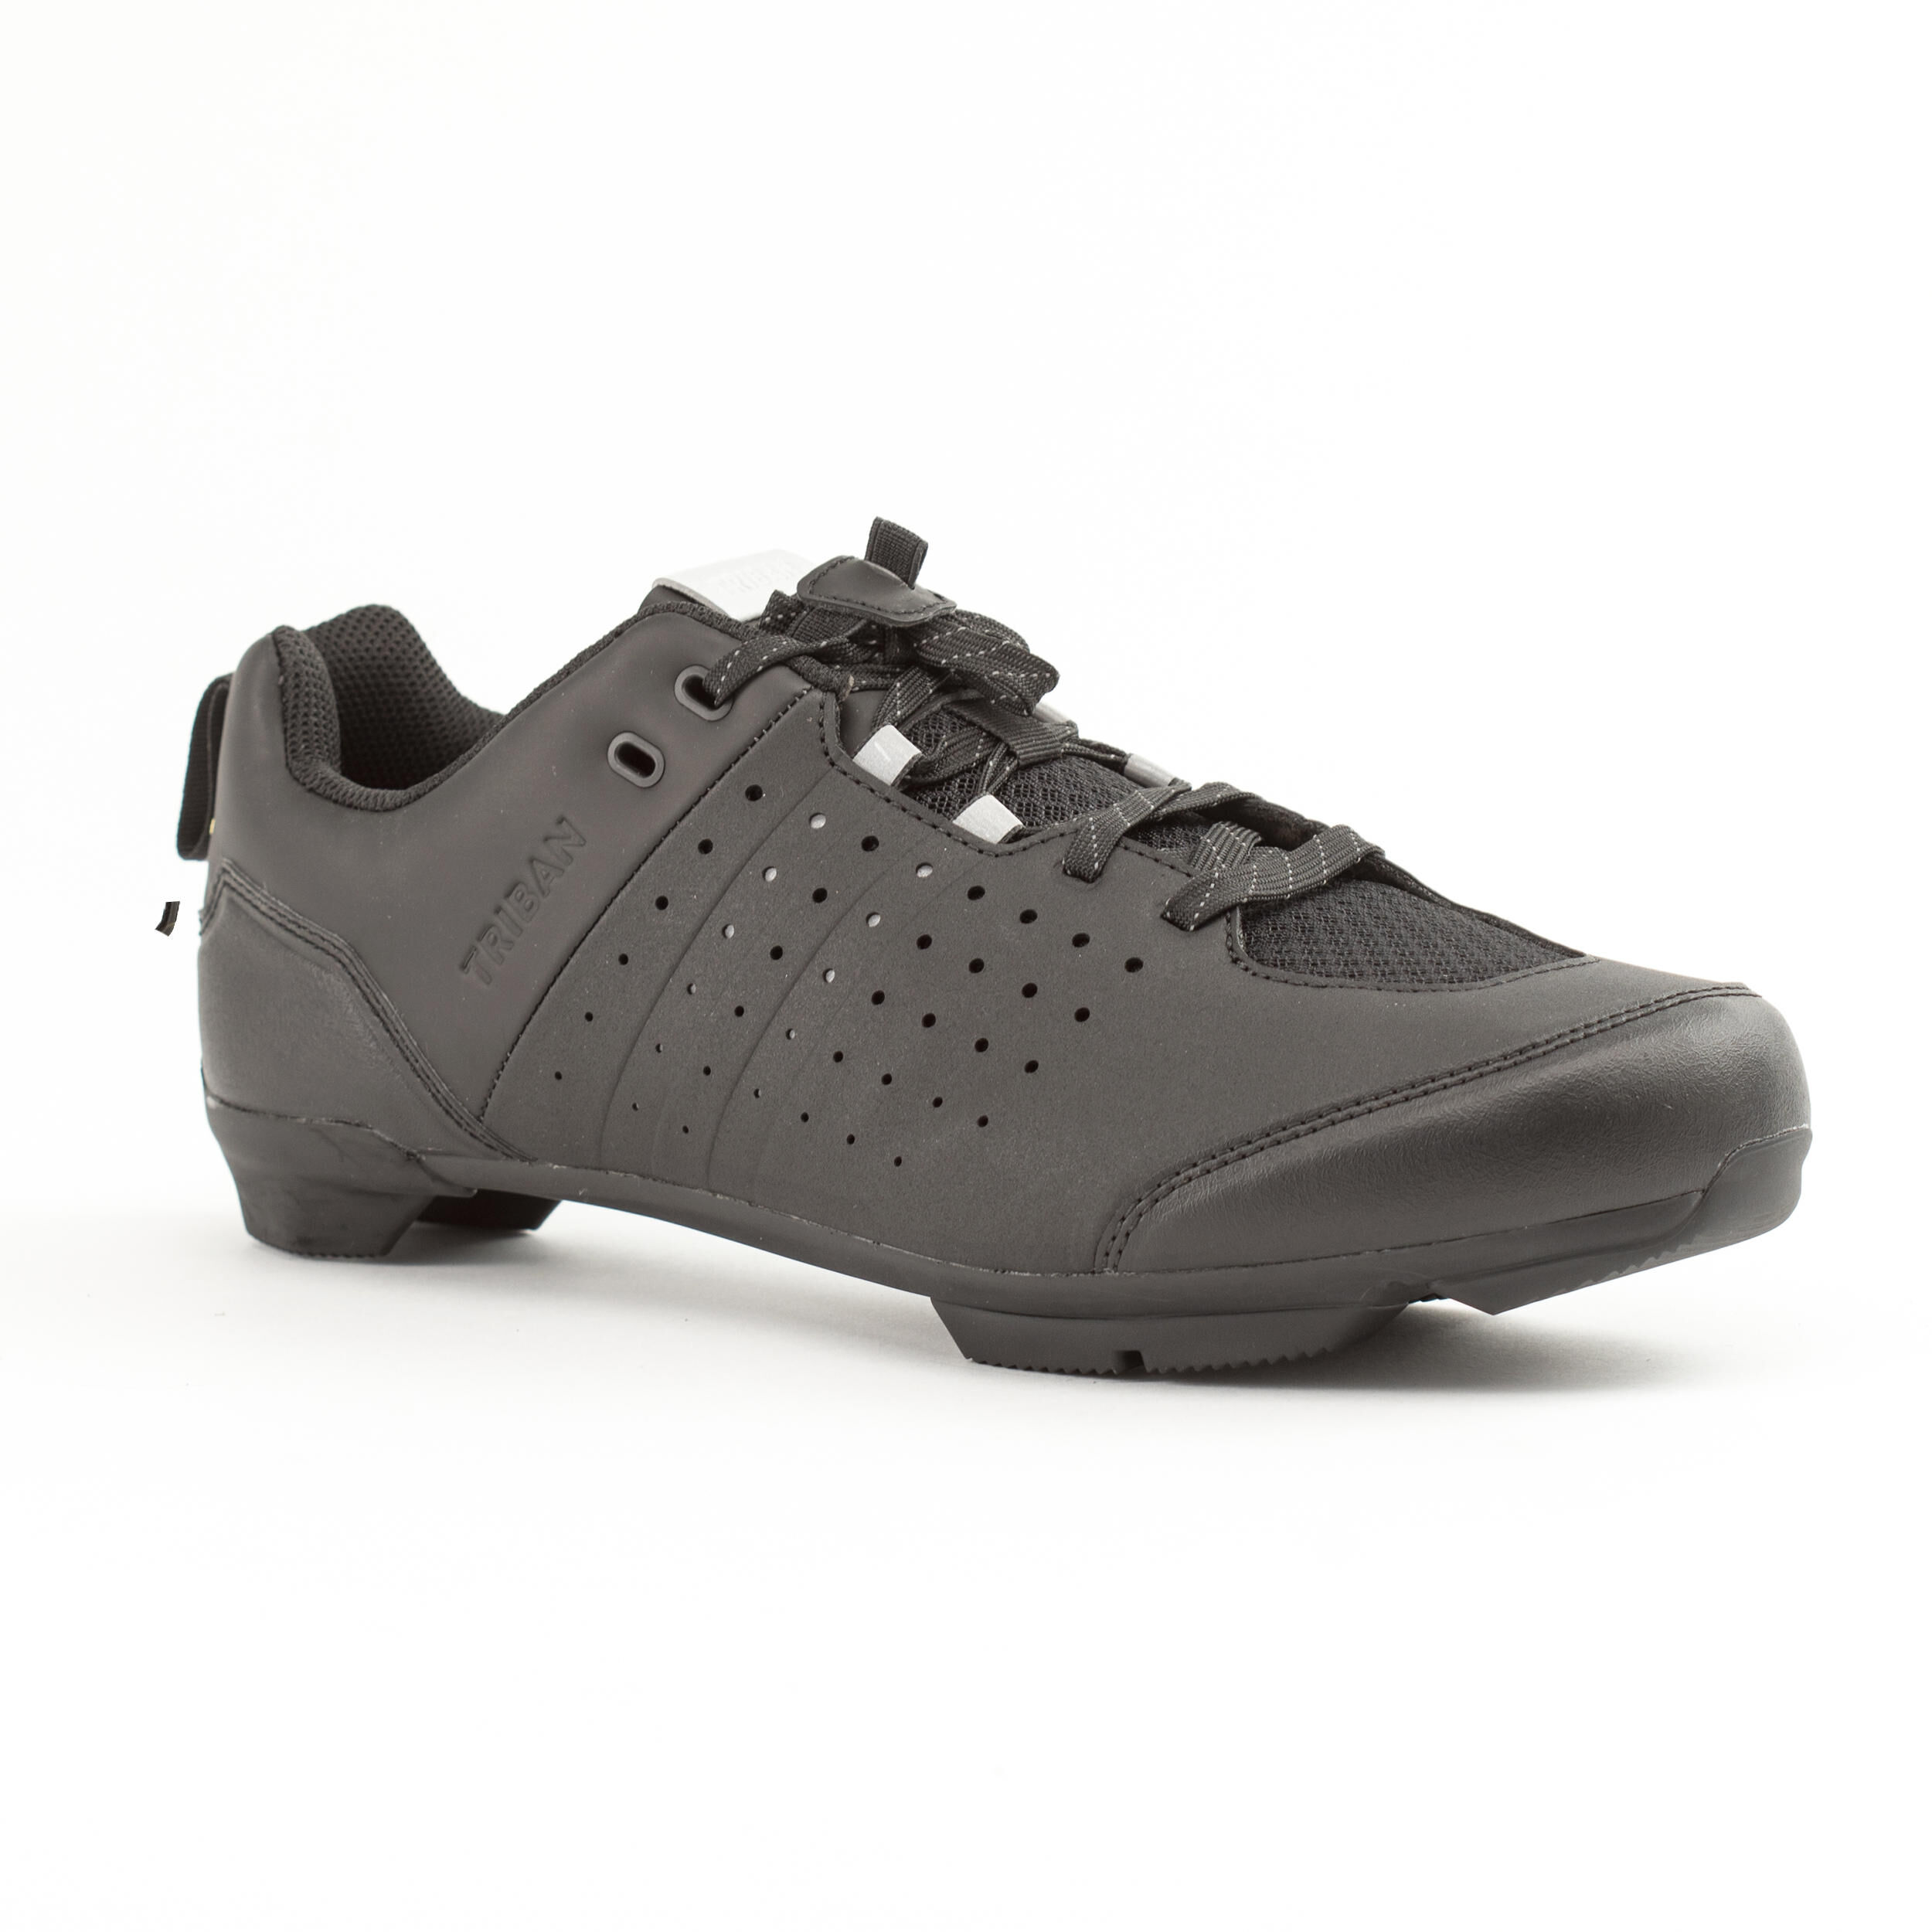 TRIBAN Road and Gravel Cycling Lace-Up SPD Shoes GRVL 500 - Black